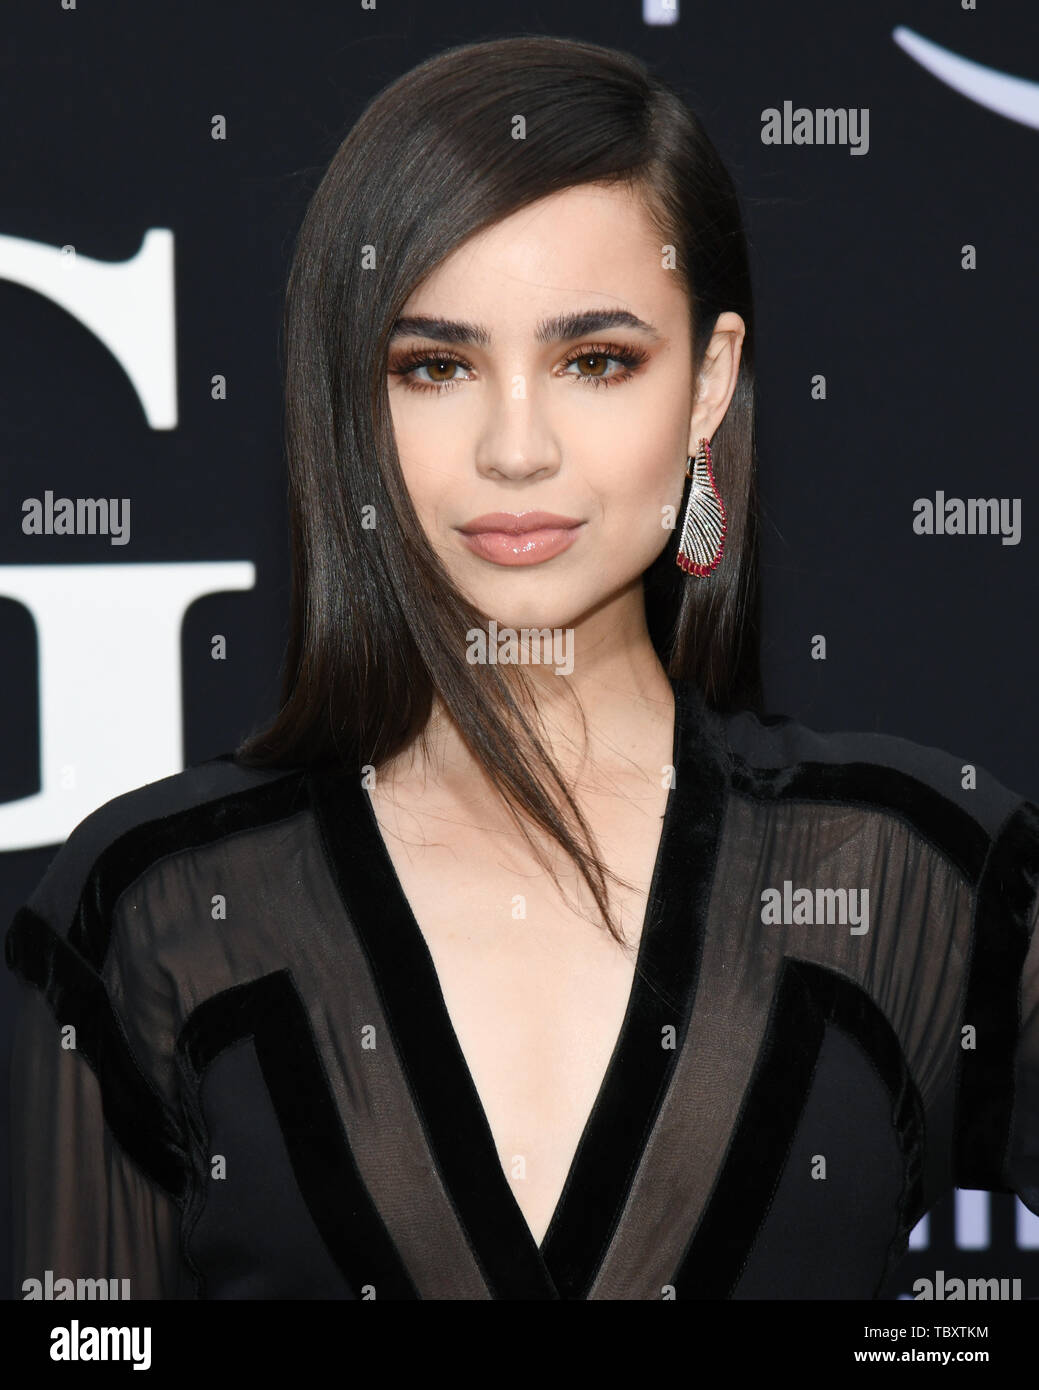 June 3, 2019 - Westwood, California, USA - 02, June 2019 - Westwood Village, California. Sofia Carson attends Premiere Of Amazon Prime Video's 'Chasing Happiness' at the Regency Village Bruin Theatre. (Credit Image: © Billy Bennight/ZUMA Wire) Stock Photo